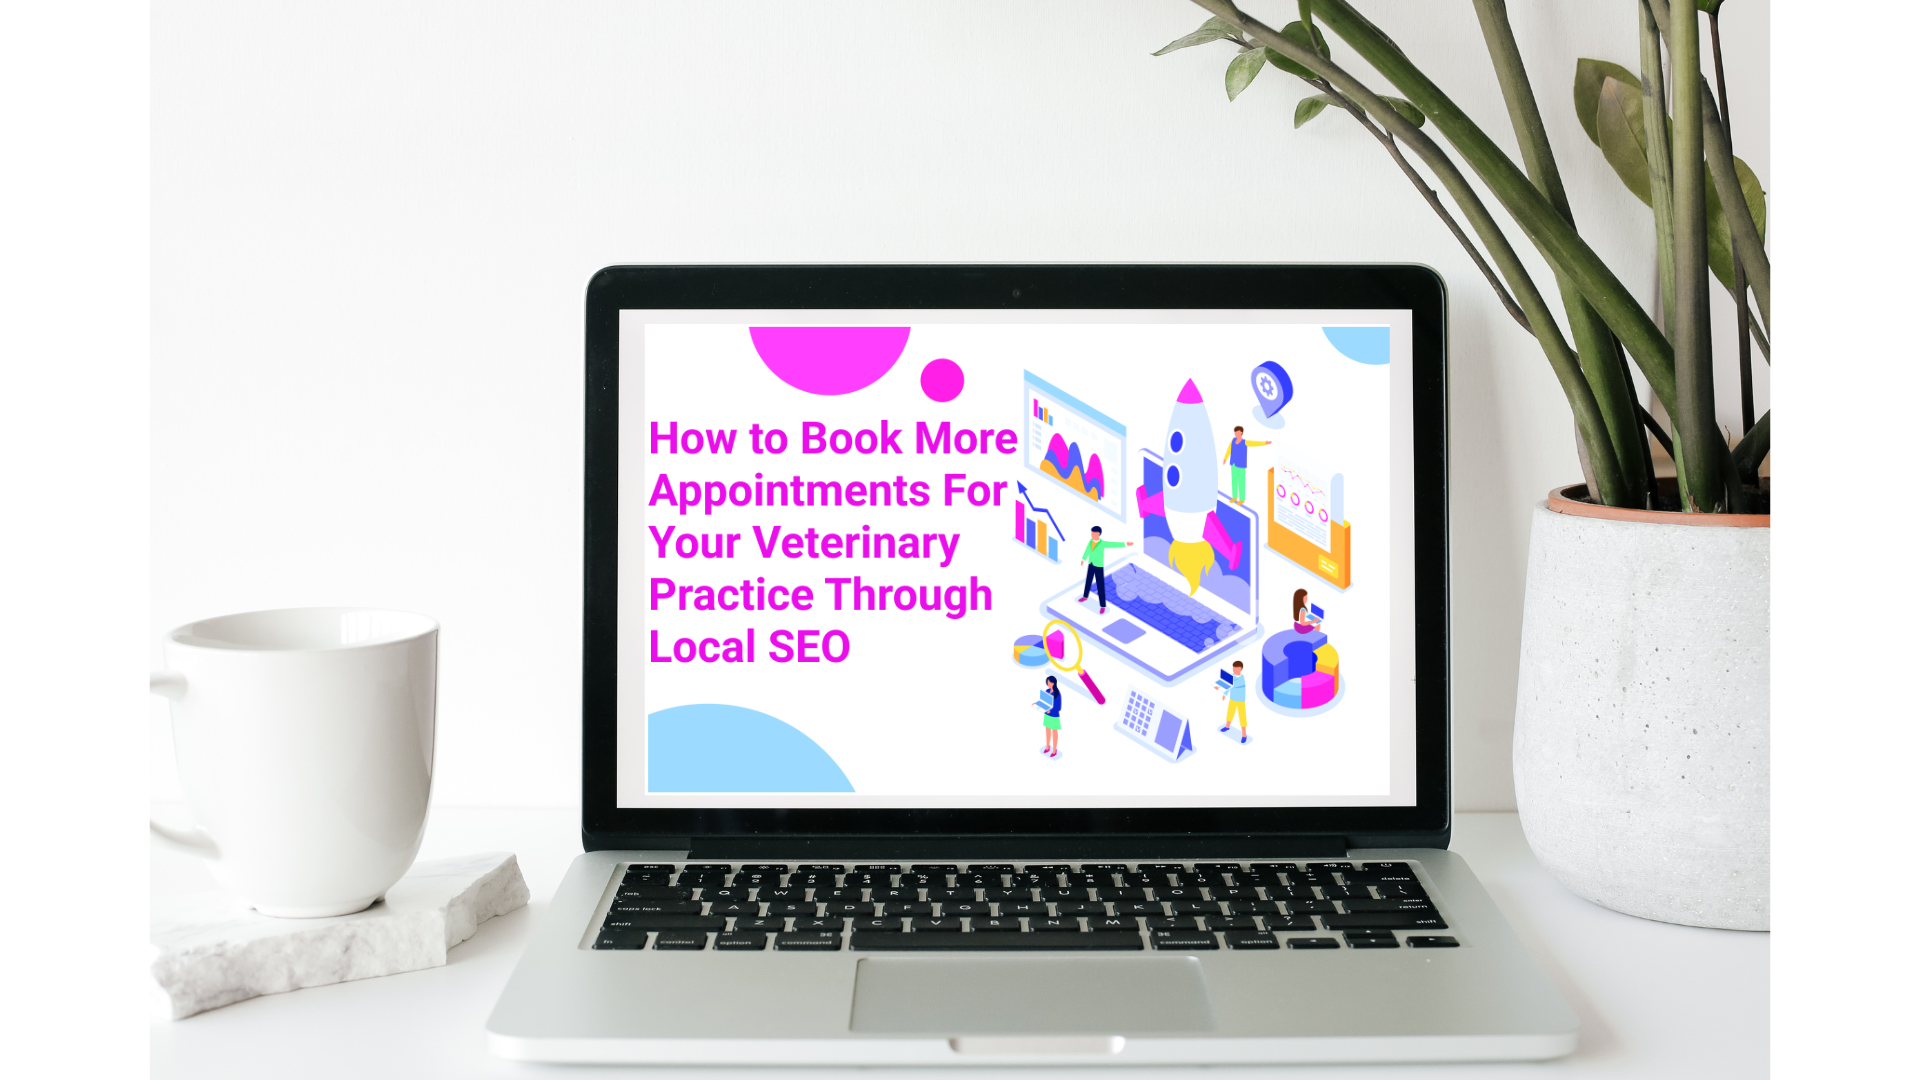 How to Book More Appointments For Your Veterinary Practice Through Local SEO